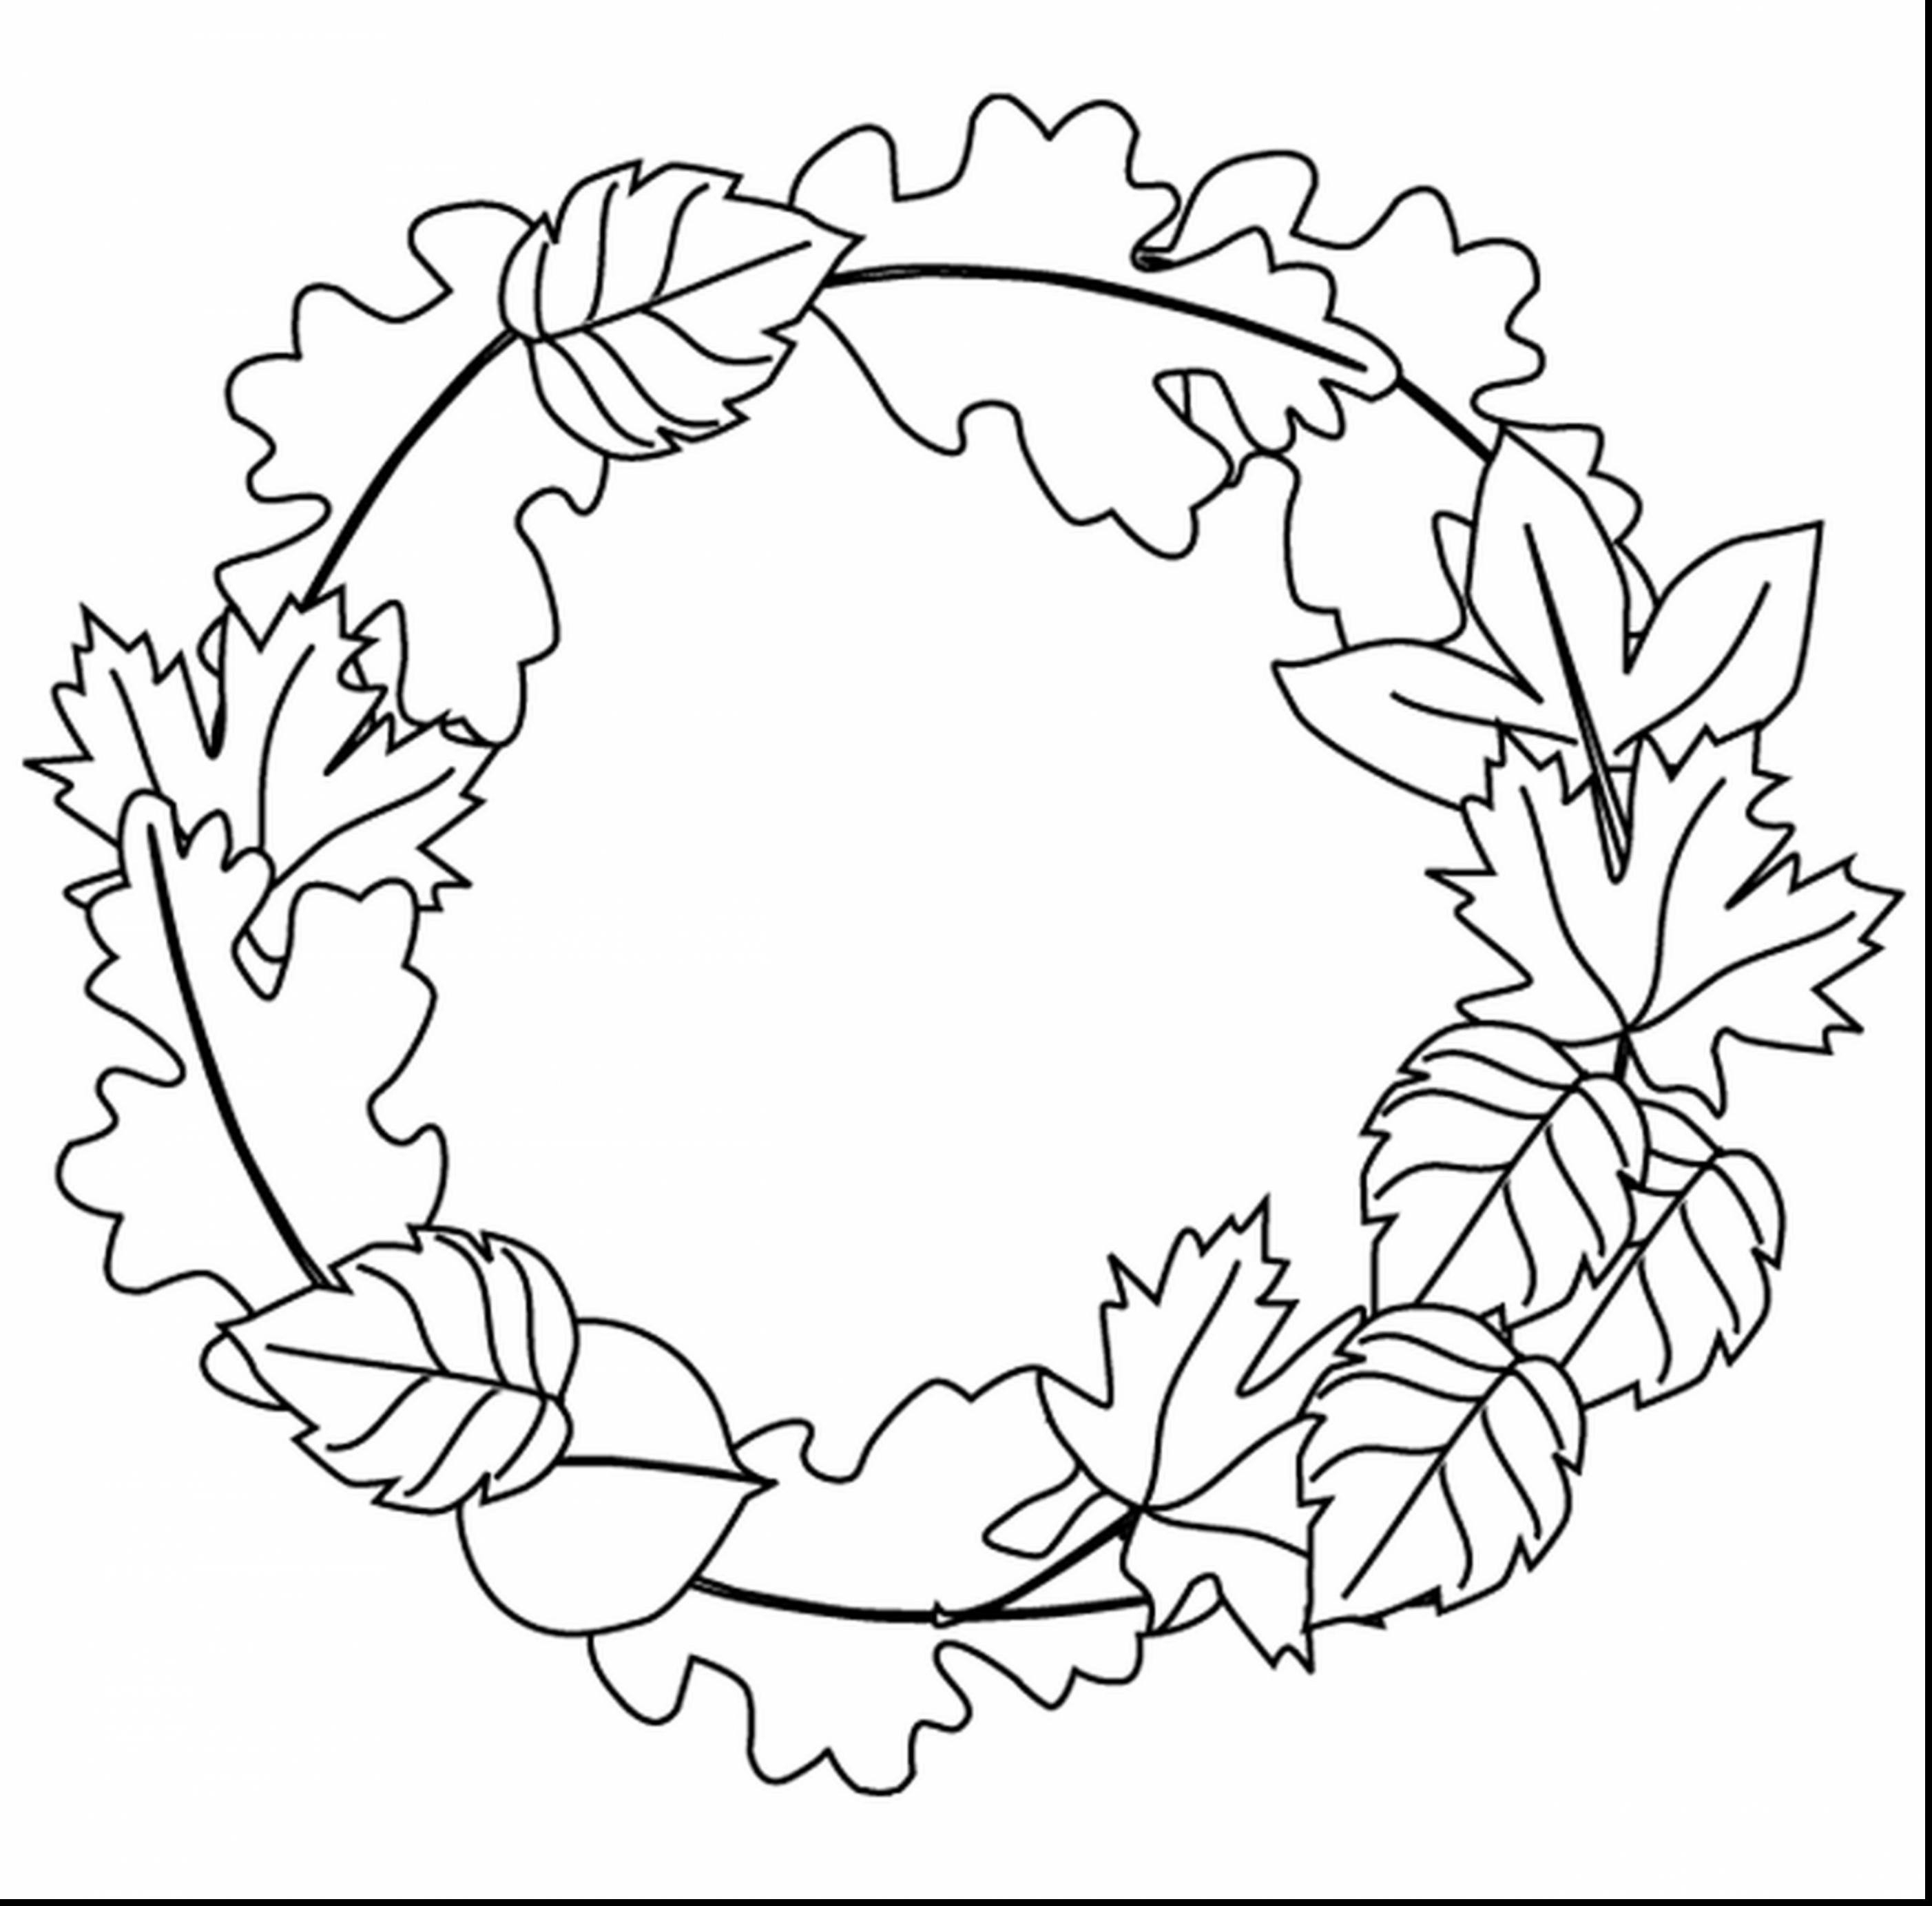 Fall Harvest Coloring Pages #7420 - Free Printable Fall Harvest Coloring Pages